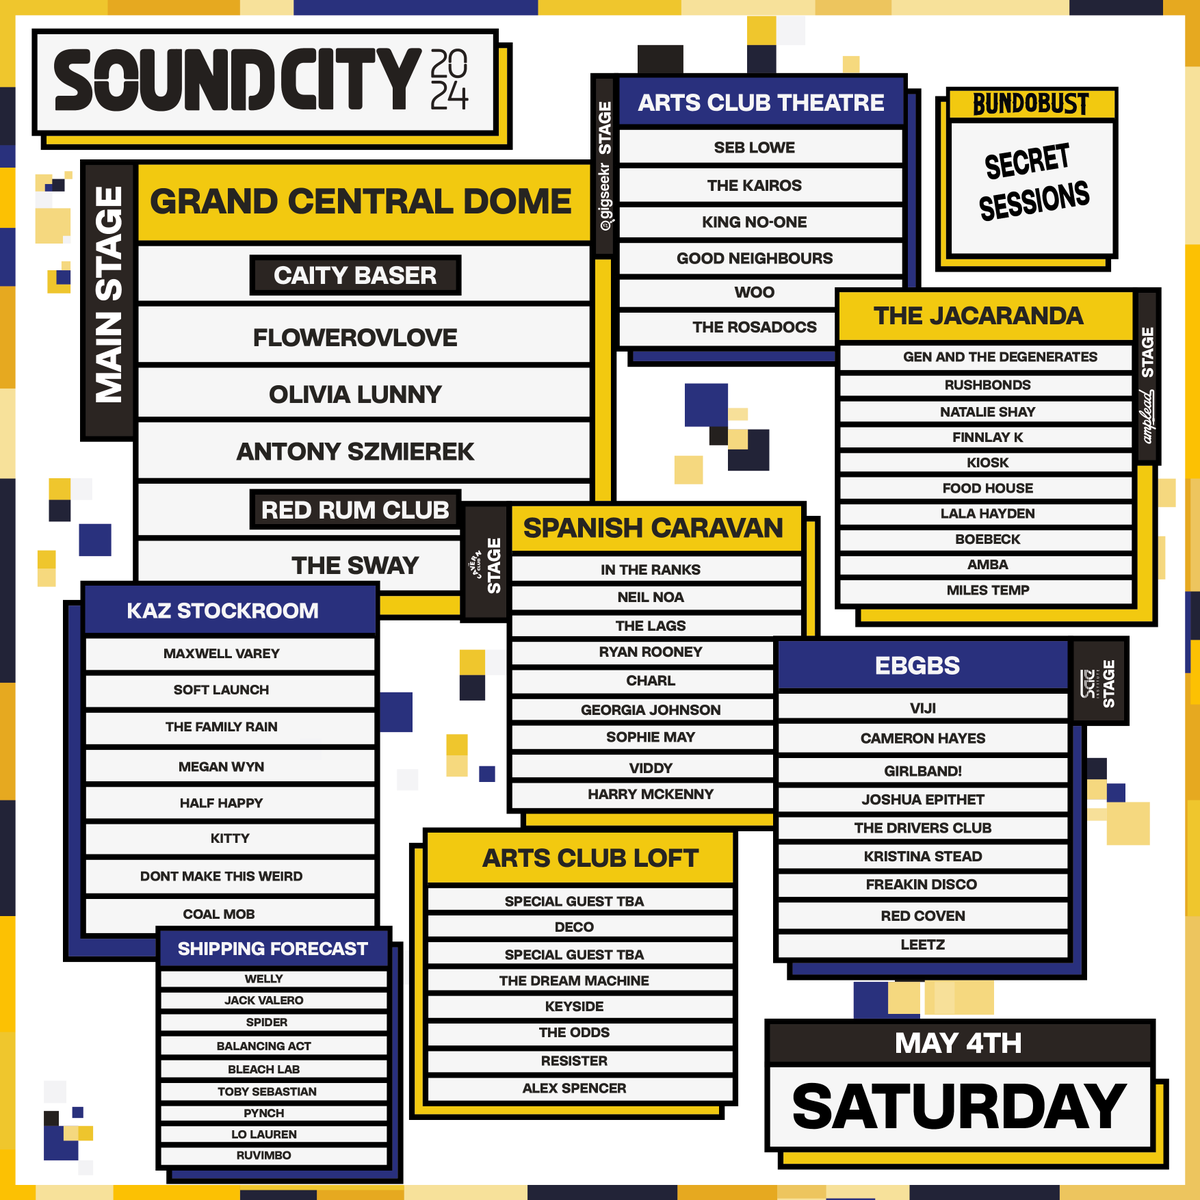 SATURDAY :: We're buzzing to return to @SoundCity this weekend, with a host of artists performing across the Saturday of LSC24!! (4/5). @knoinnit + @lauralalahayden (LALA HAYDEN) + @PynchBand + @thefamilyrain & more hit Liverpool in a few days, we'll see you there 🤍